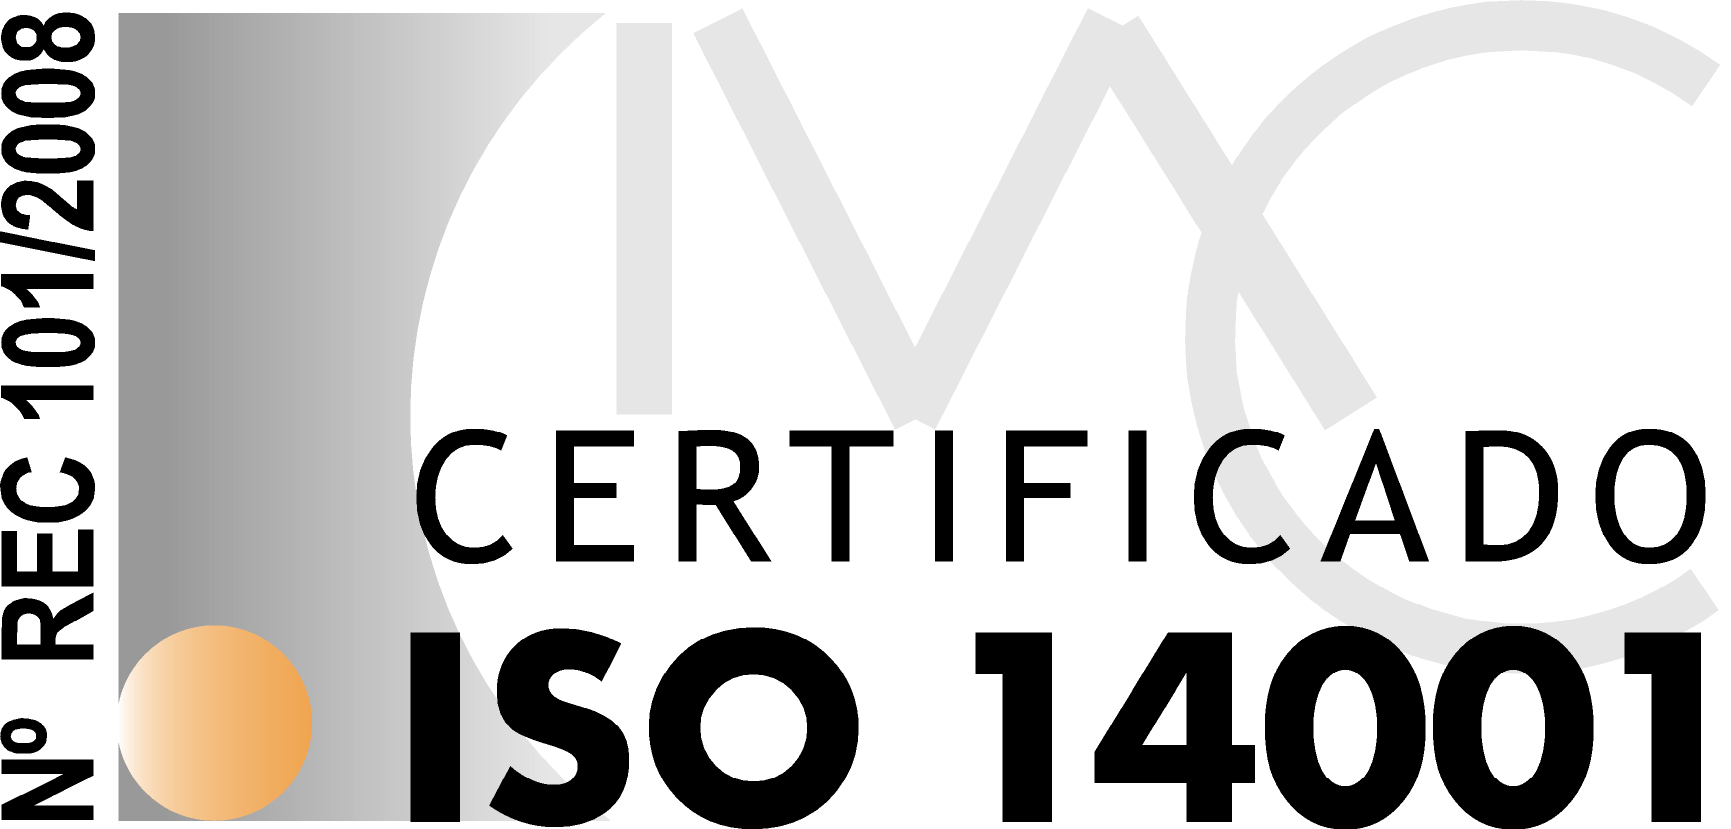 Our environmental management certificate ISO 14001 has been renewed once again